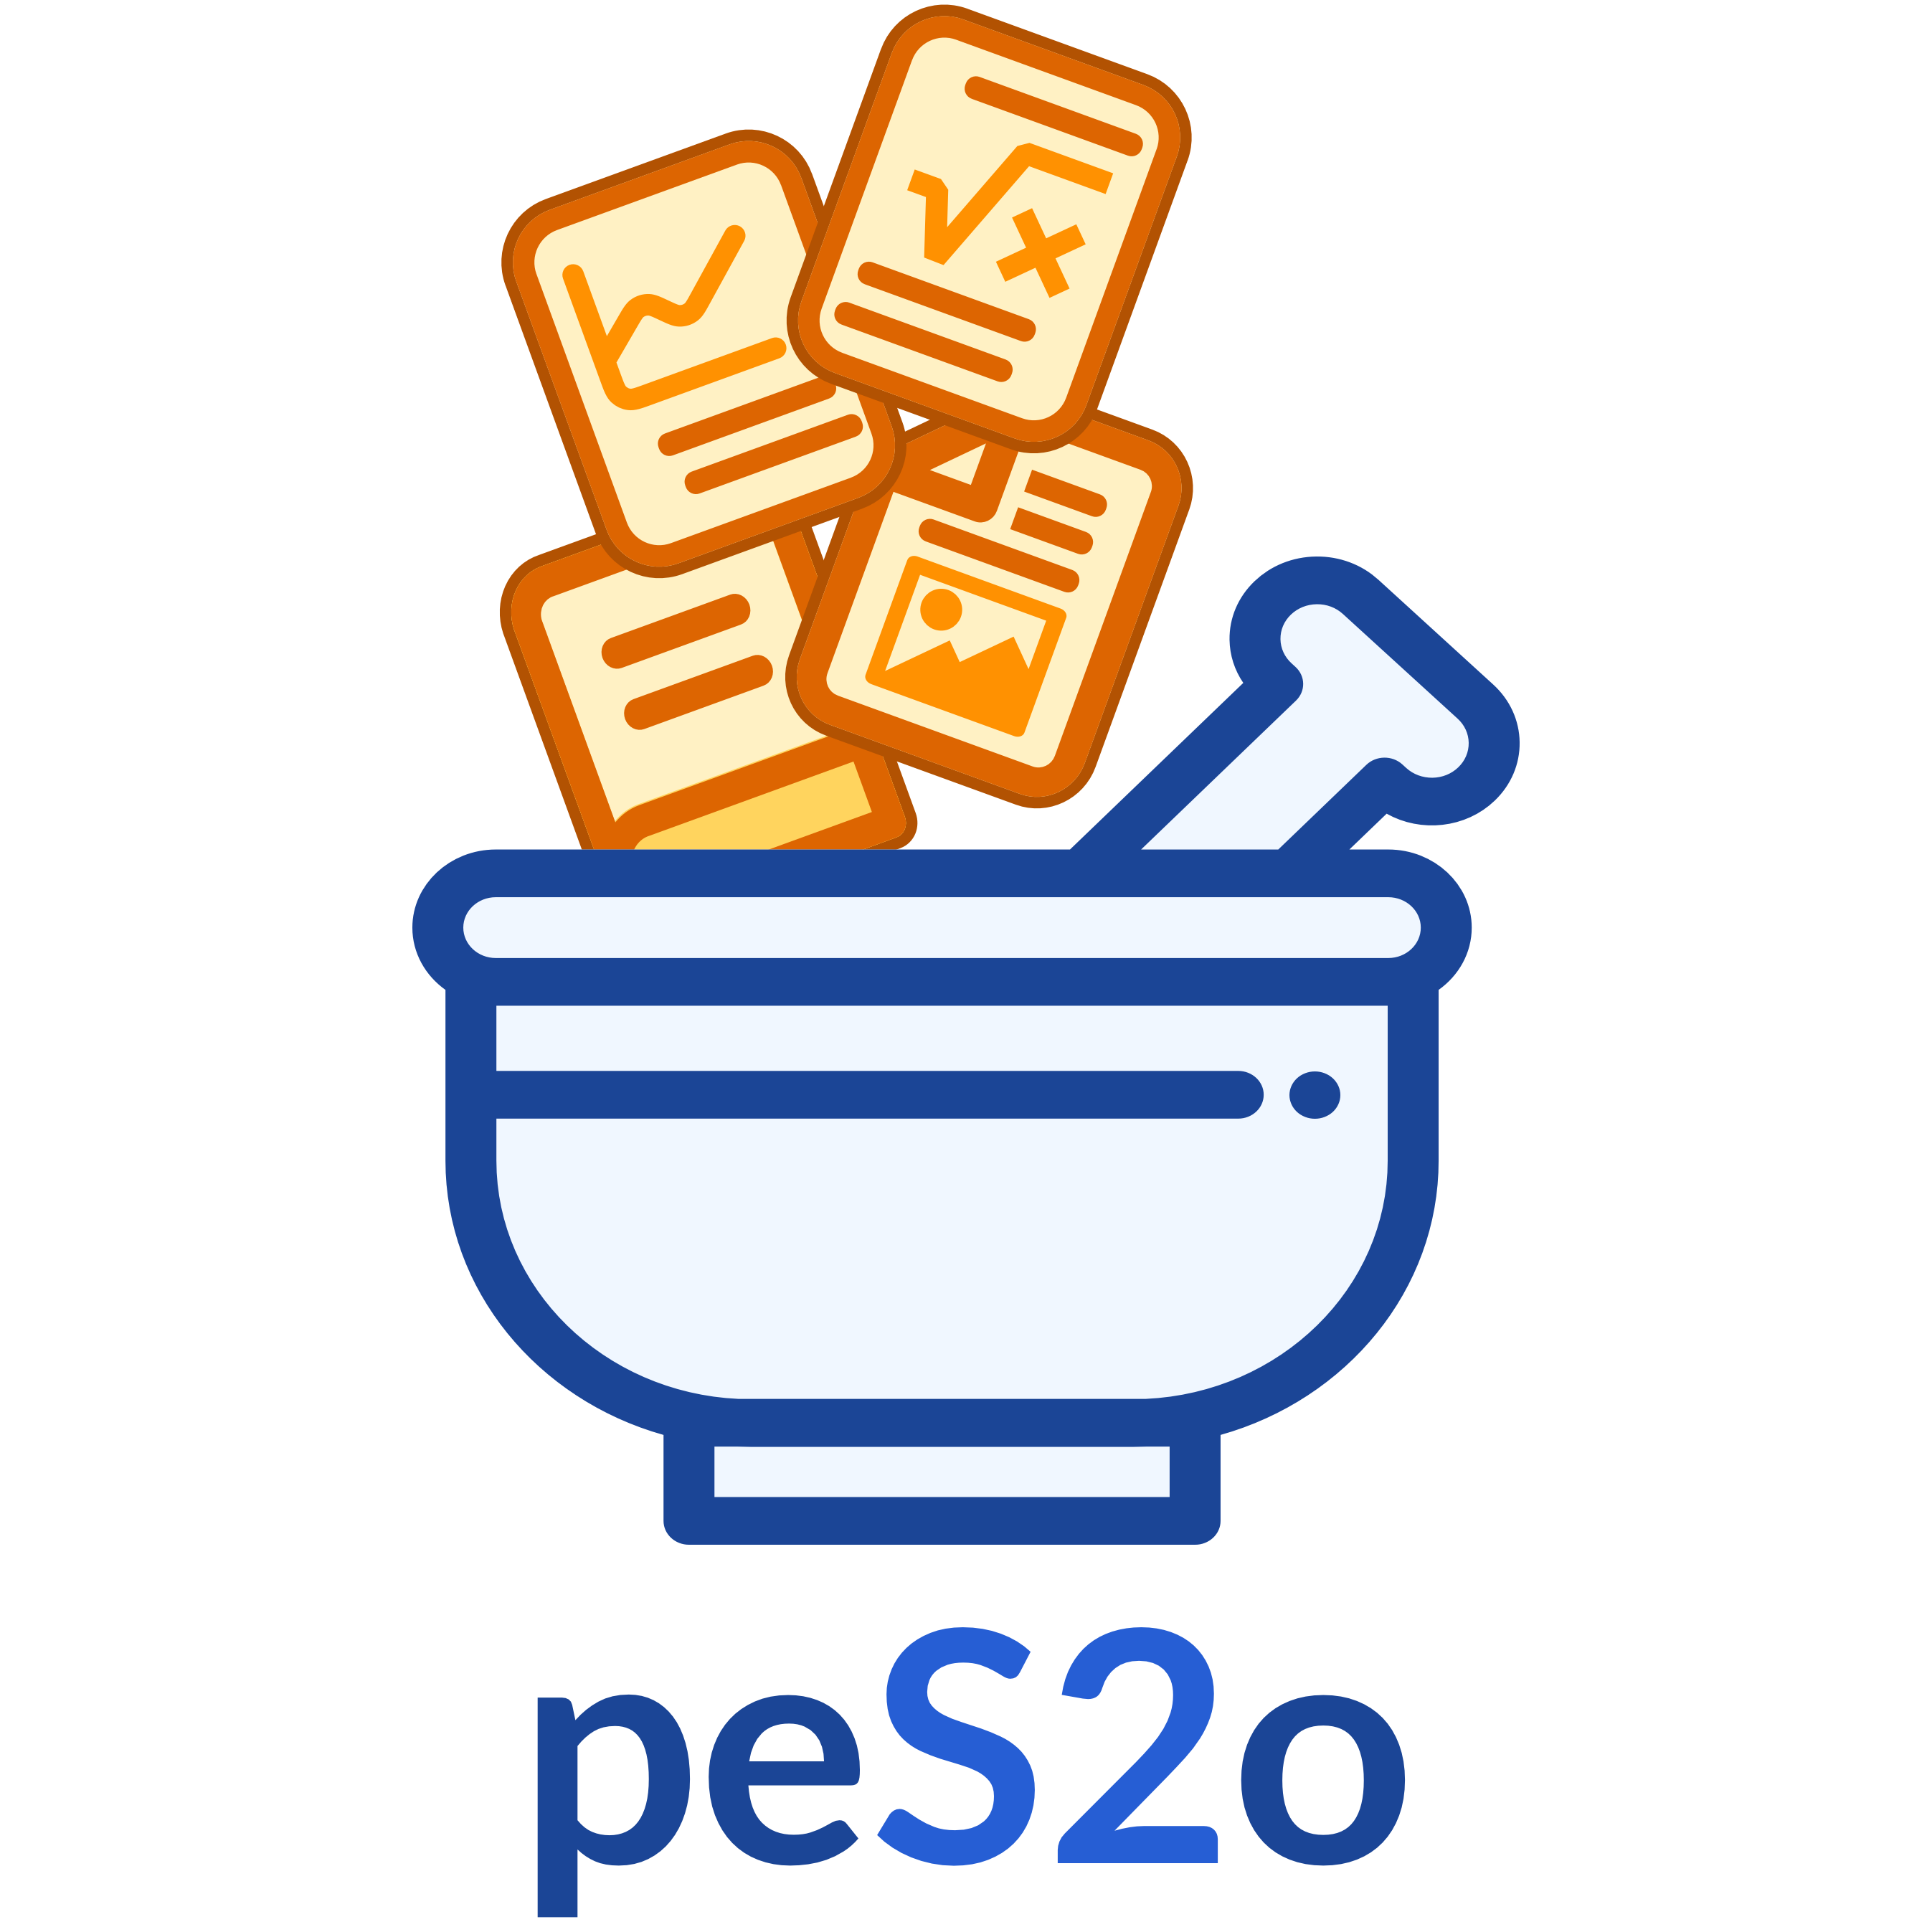 peS2o logo. It's a picure of a mortar and pestle with documents flying in.